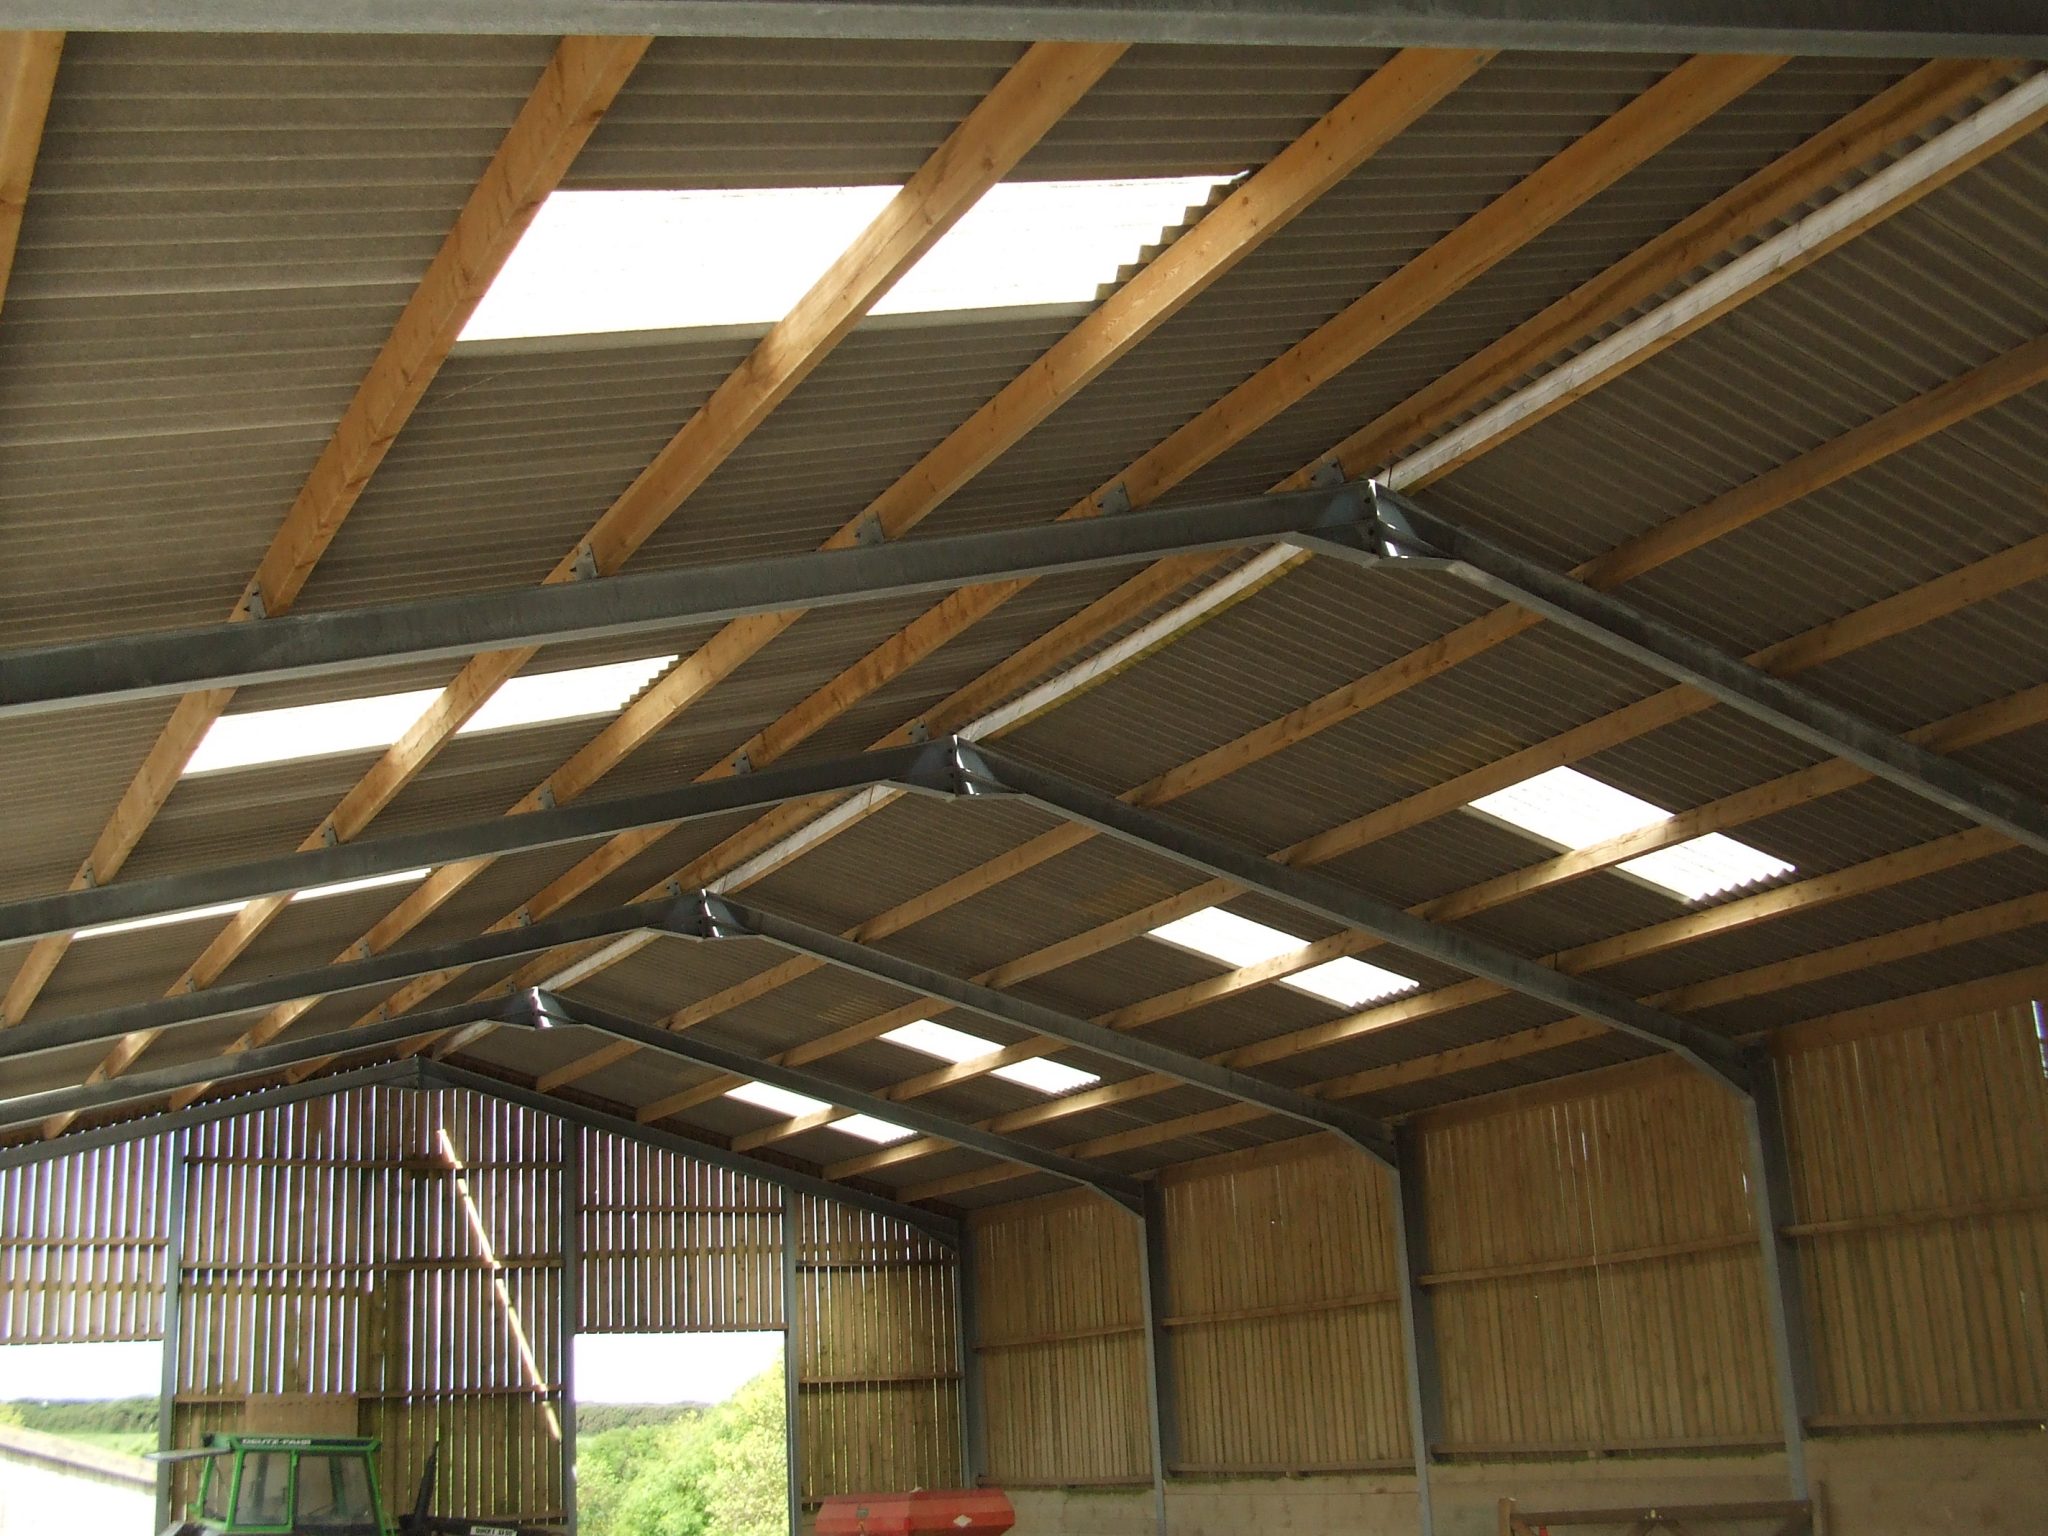 Barn roof structure